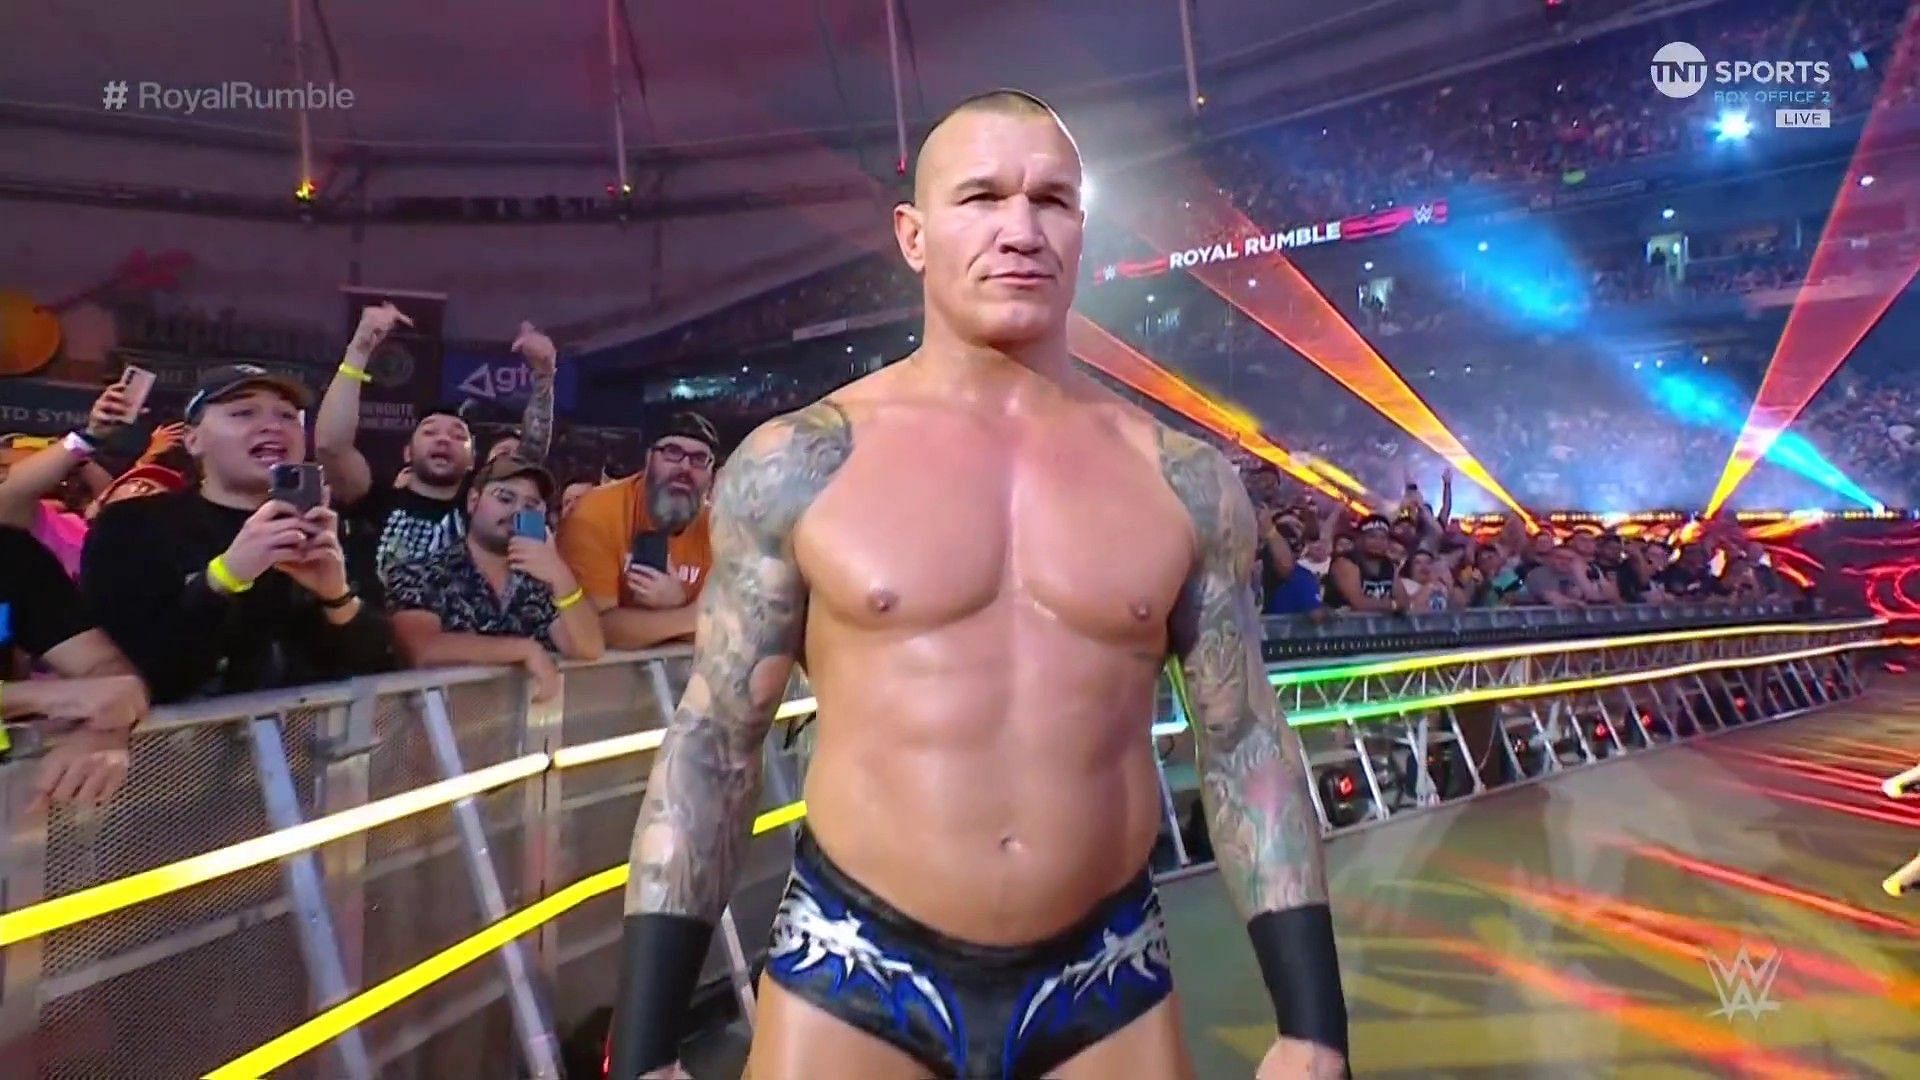 Randy Orton entering his title match at the Royal Rumble